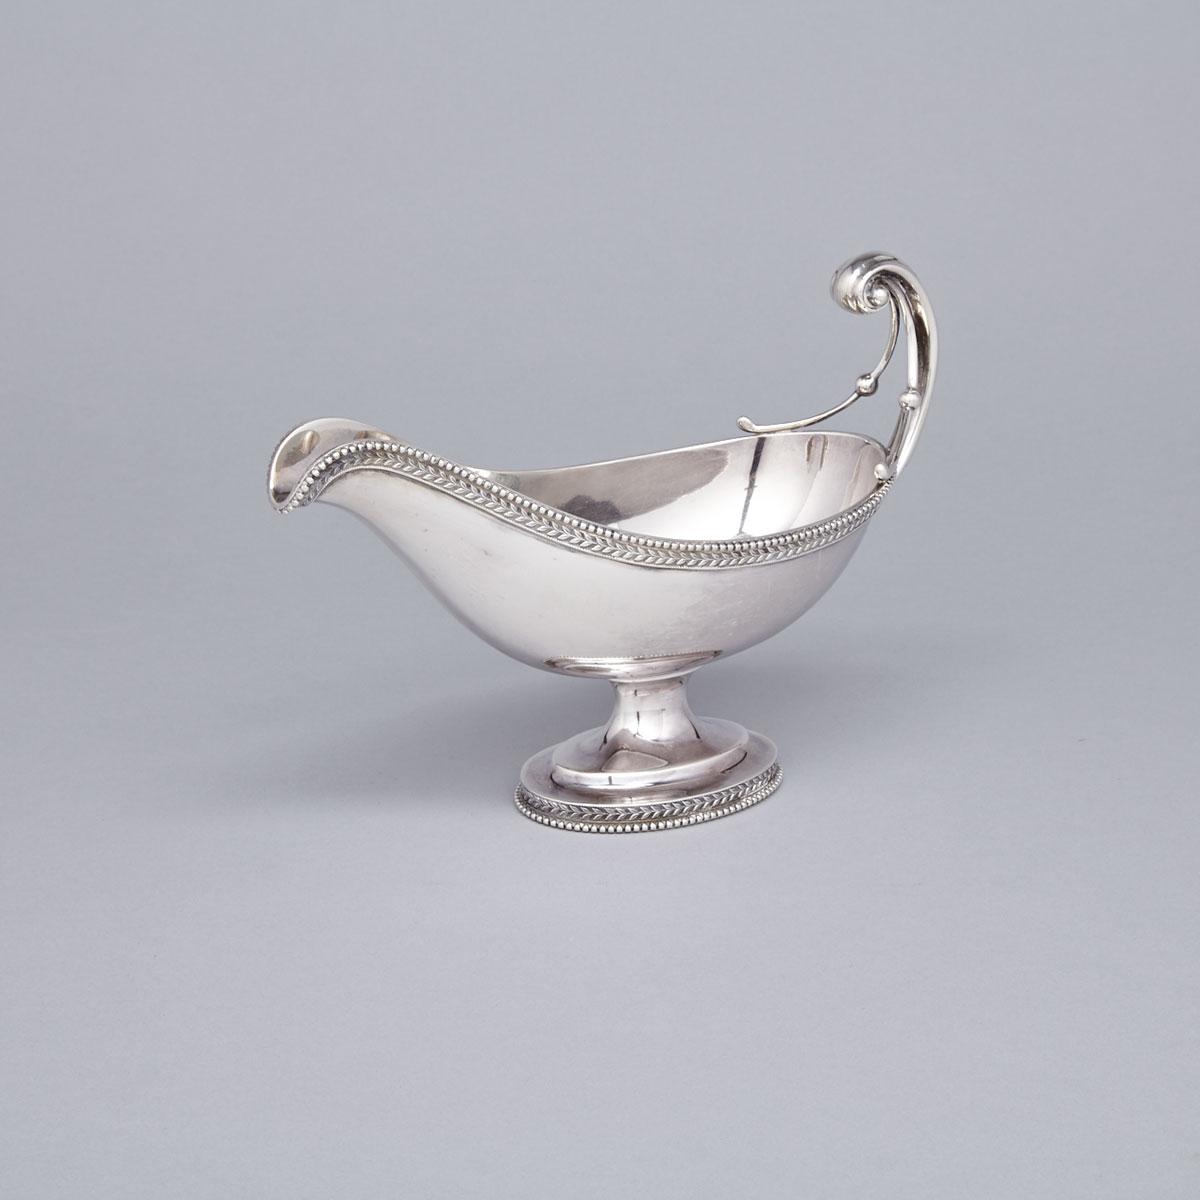 Pair of American Silver Sauce Boats, Ball, Black & Co., New York, N.Y., c.1870